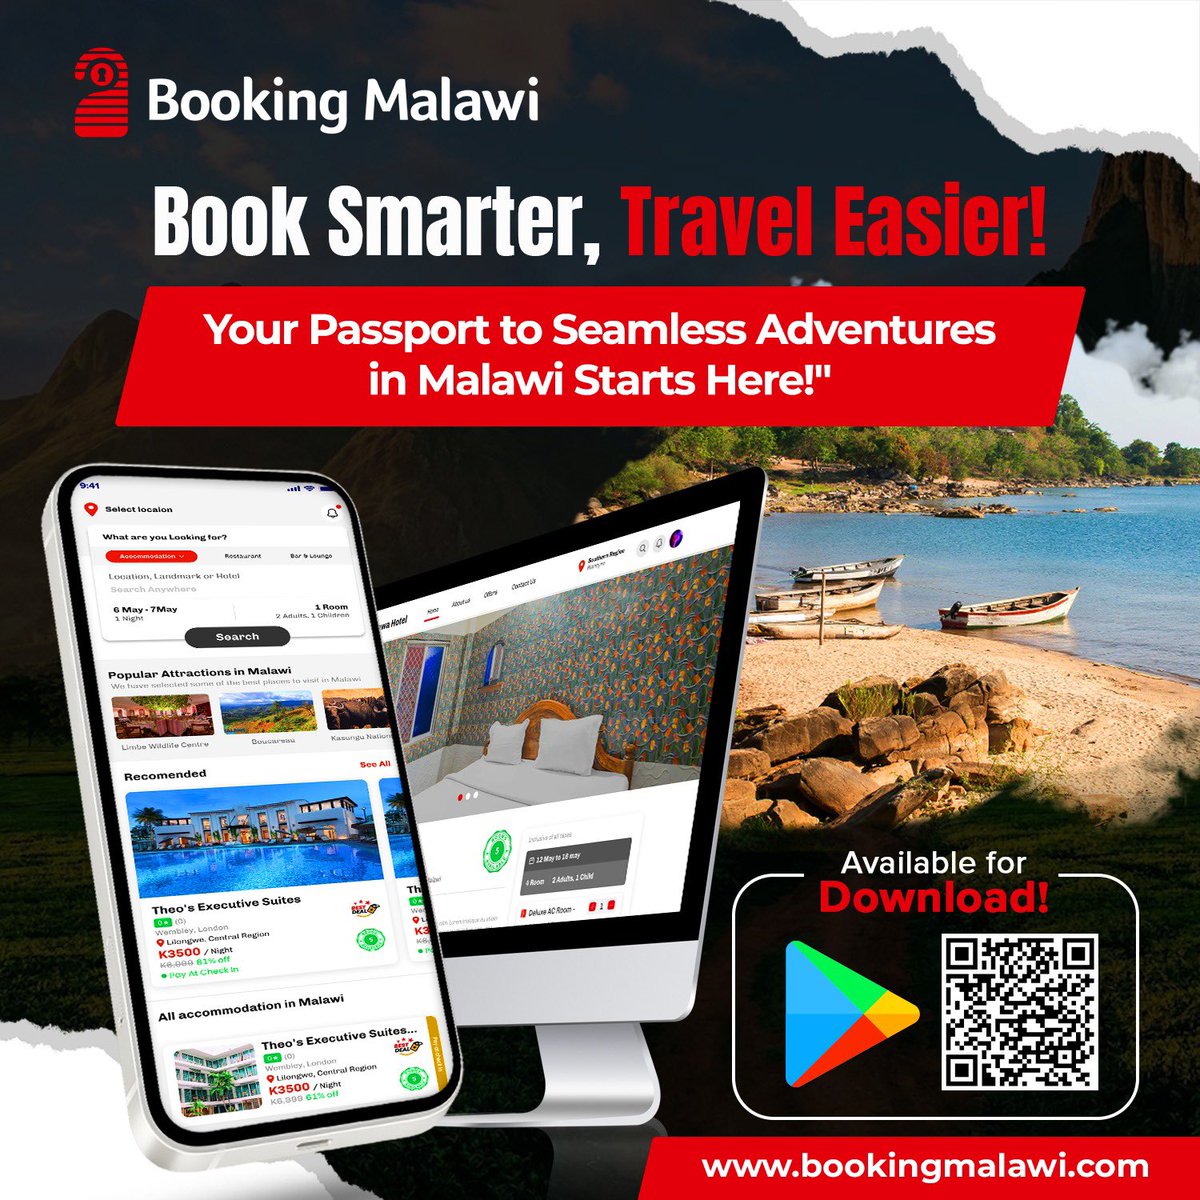 Planning a weekend getaway? Let BookingMalawi handle the details while you enjoy a stress-free trip. #WeekendEscape #BookingMalawi